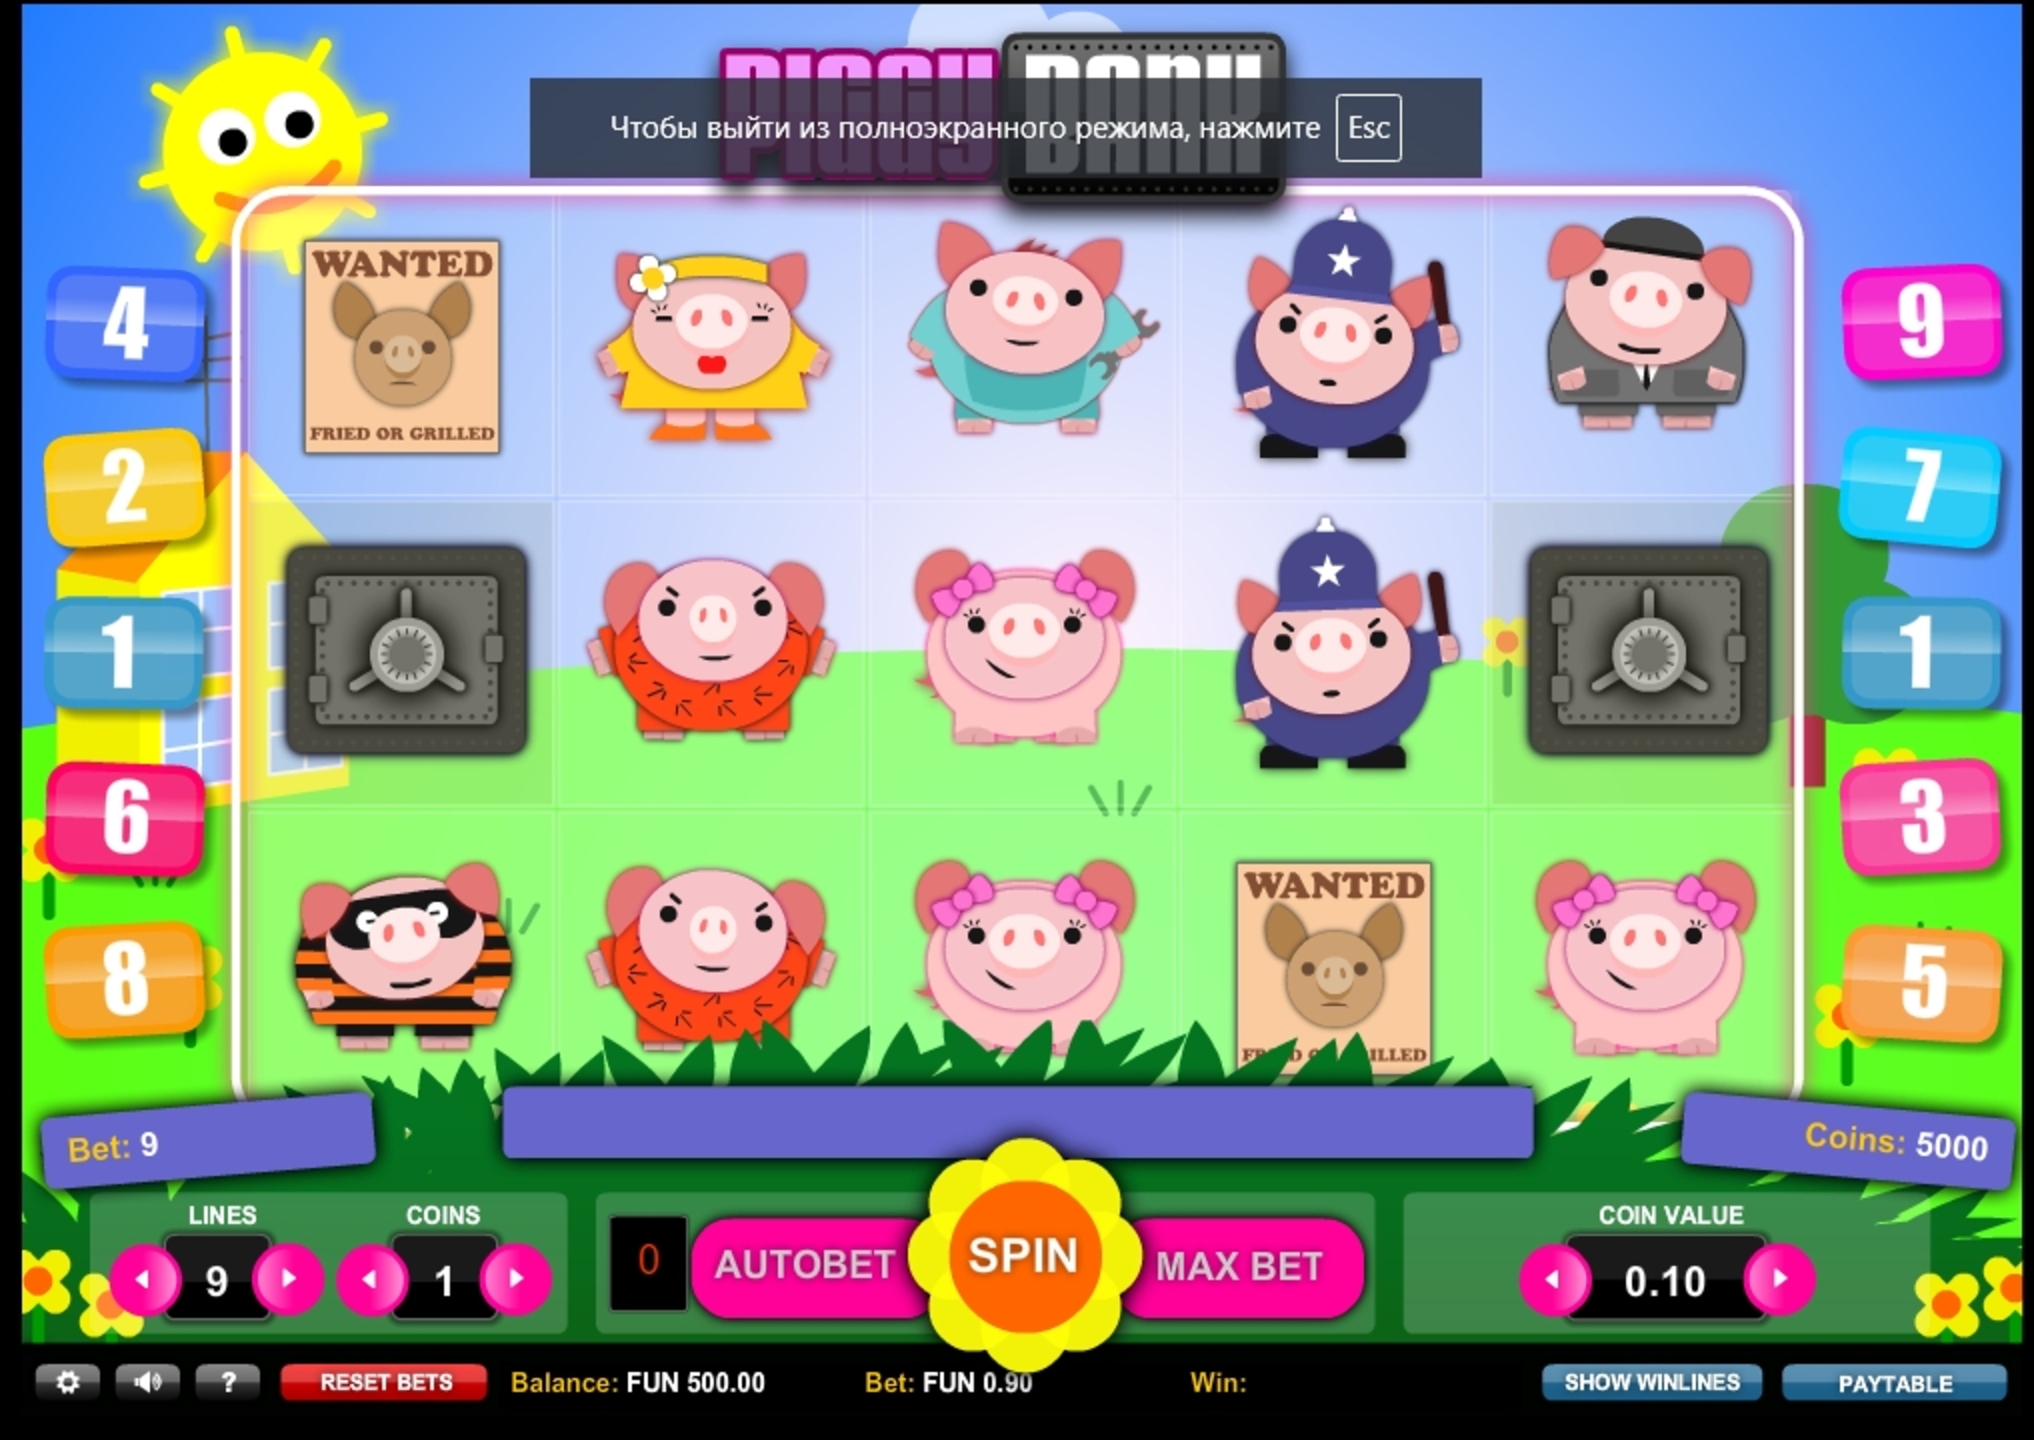 Reels in Piggy Bank Slot Game by Playn GO